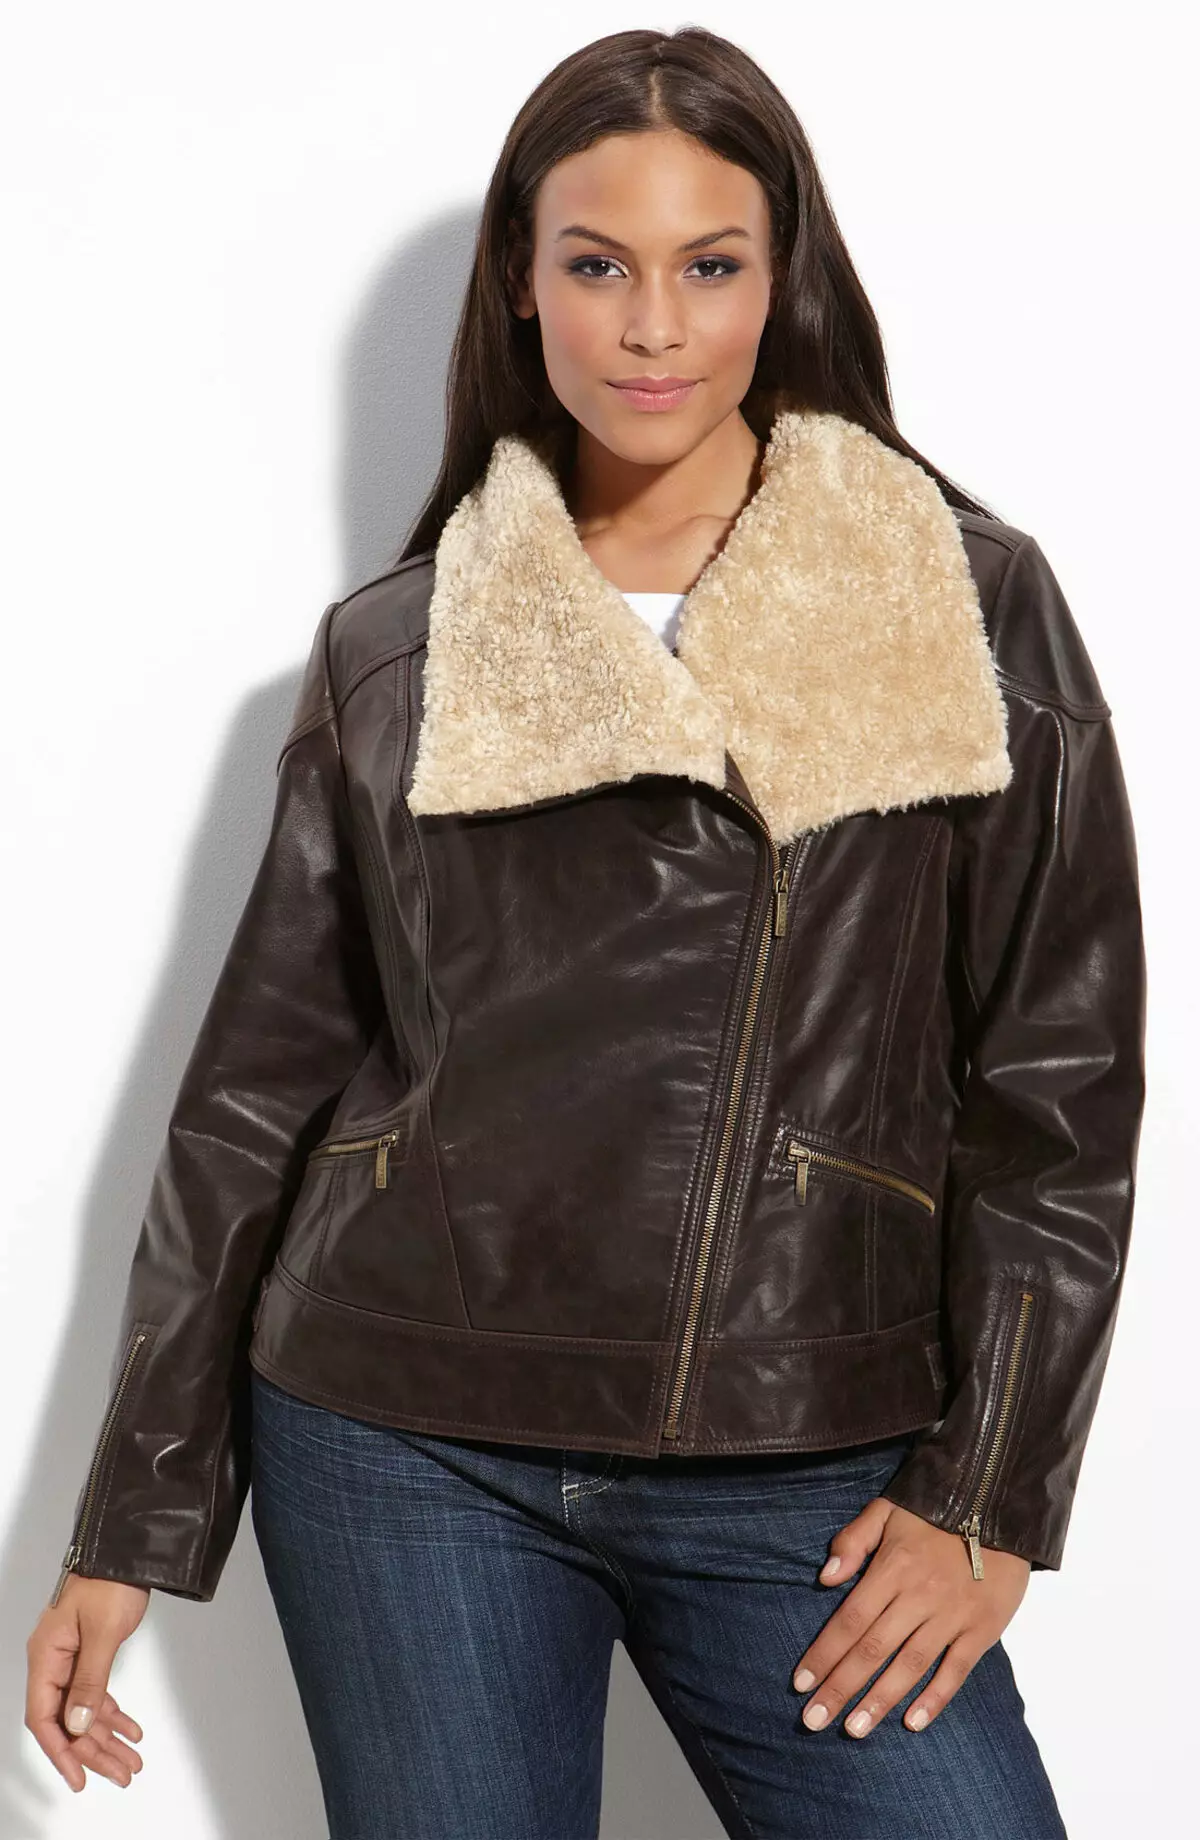 Women's leather jackets of large sizes: how to choose full women and what to wear with 13426_15